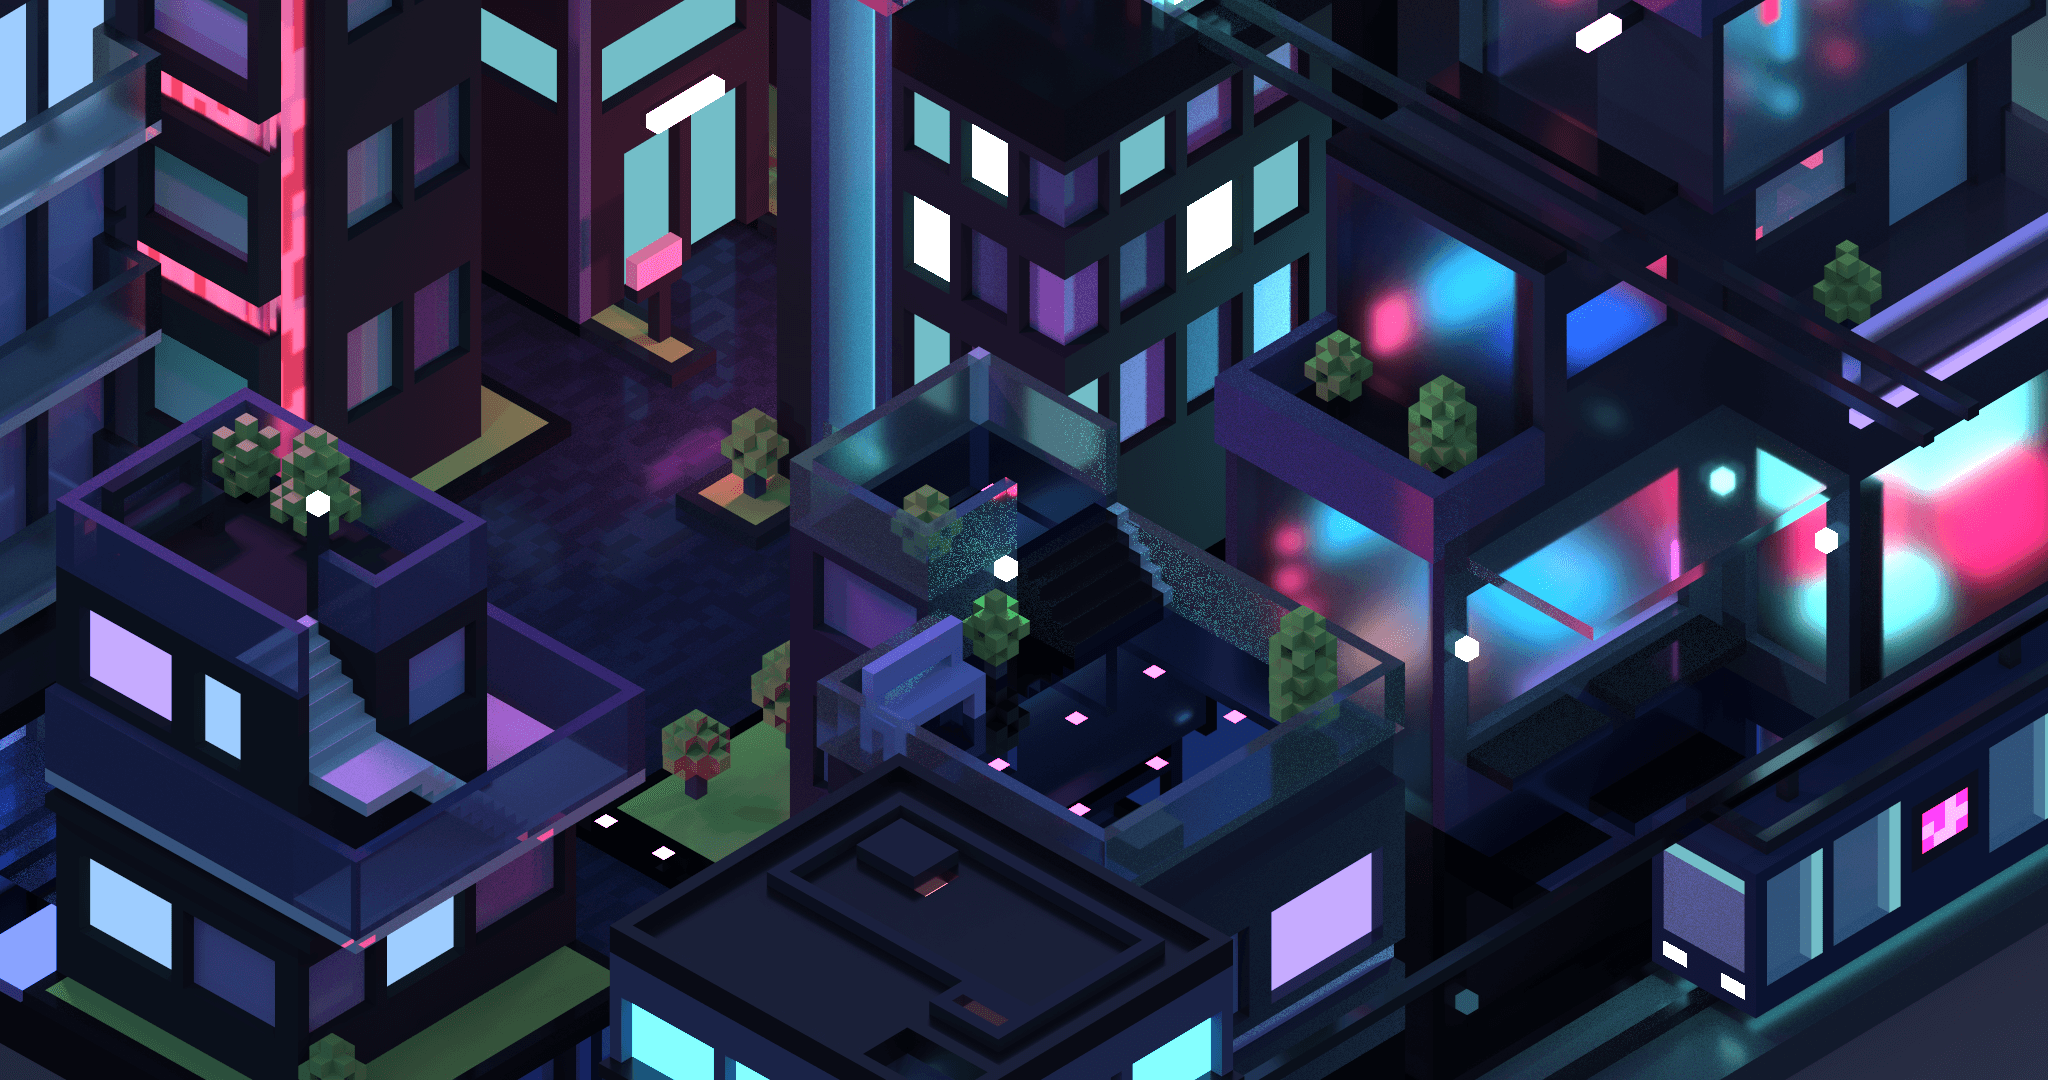 3D isometric city by night by Meg Wehrlen showing a square based city of high rise building with a synthwave/vapowave feel. Software is MagicaVoxel, 3d illustration. This shot includes a highrise vue, a glass elevator, glass sky train, a roof top, trees and building details.